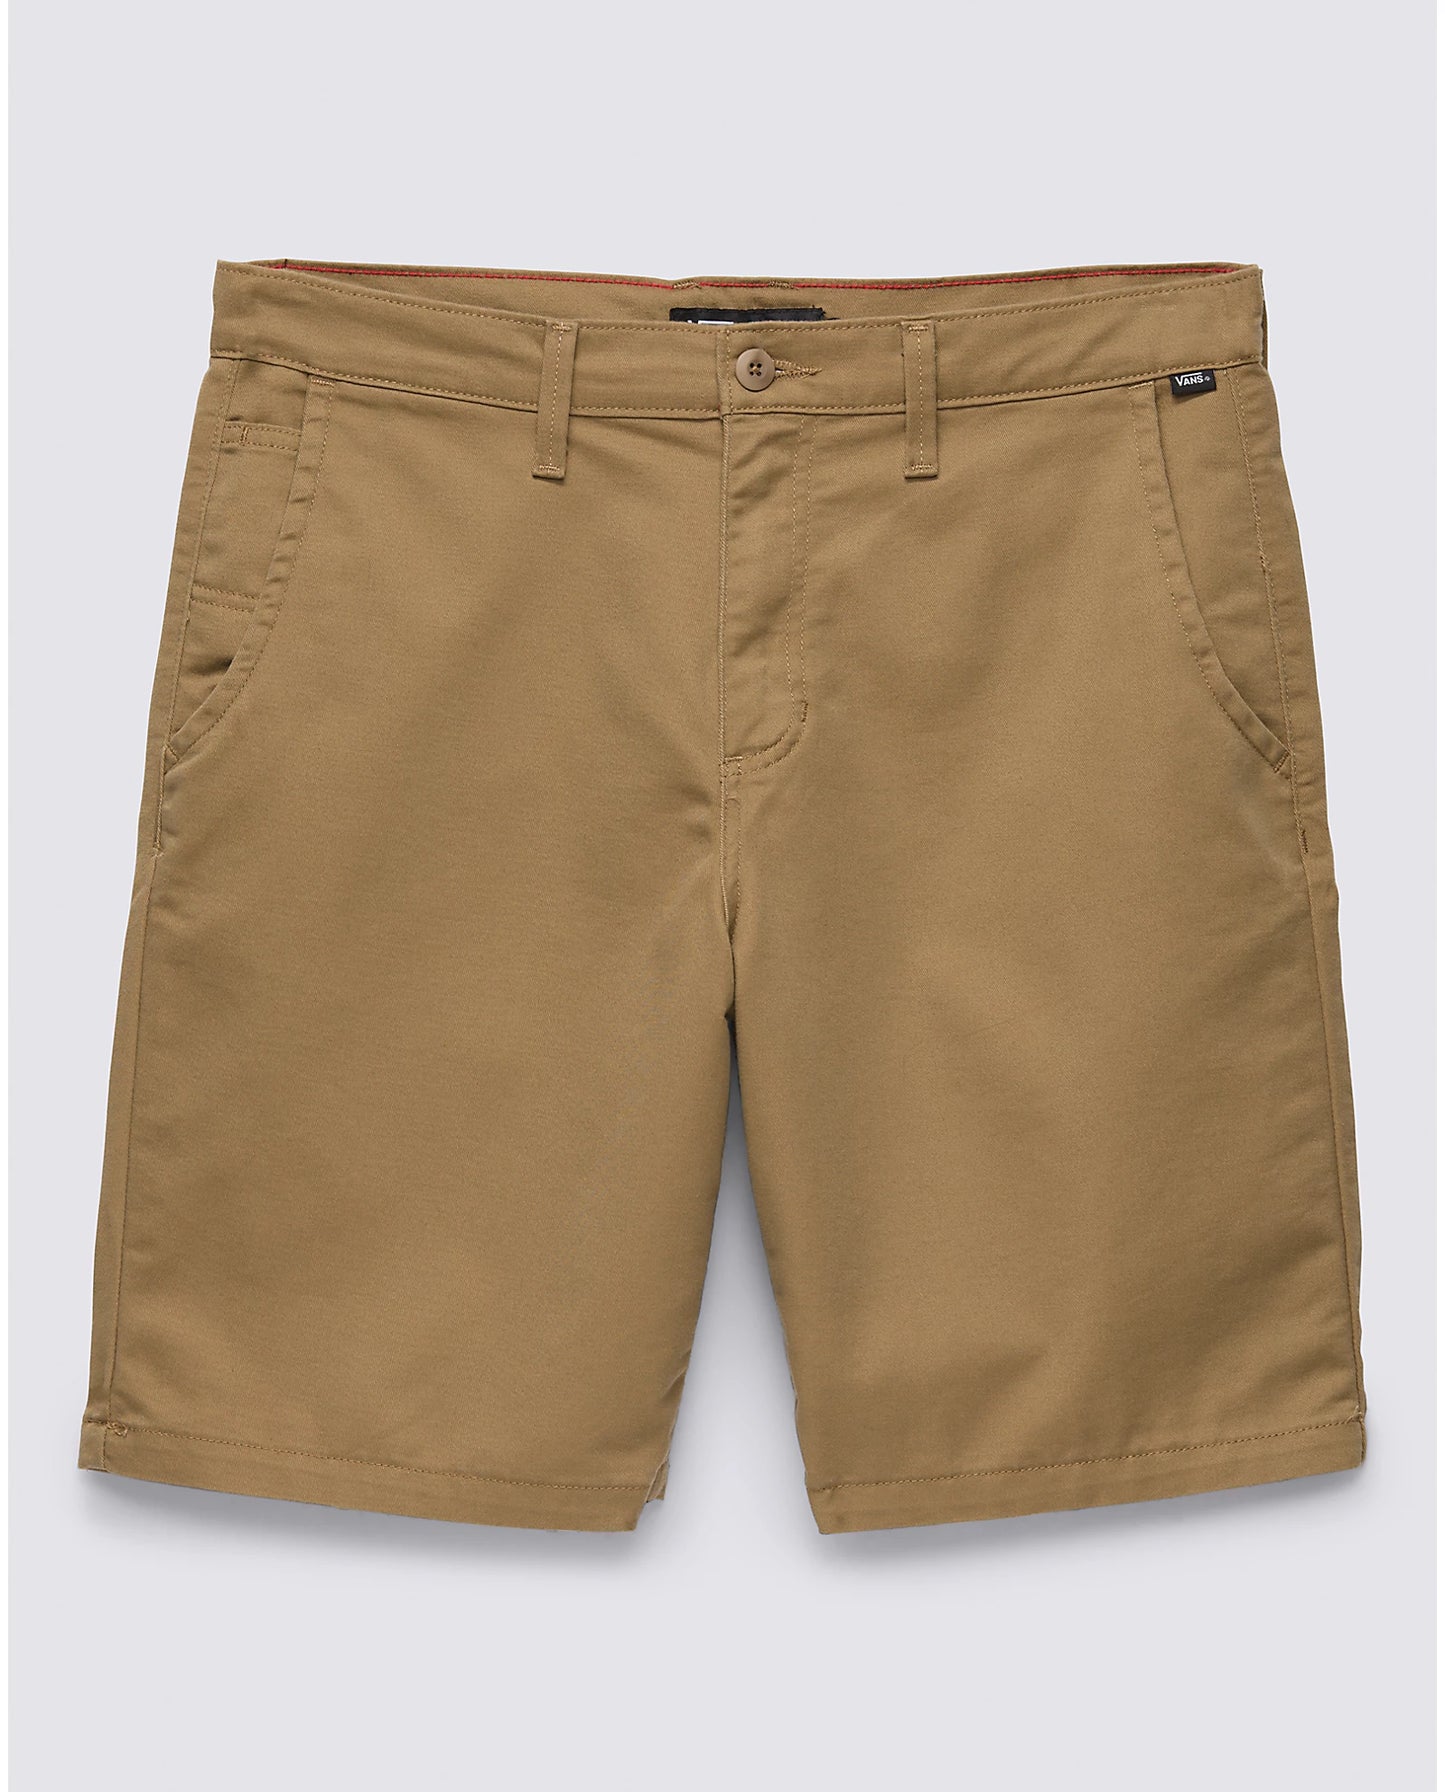 Vans Mens Authentic Chino Relaxed 20'' Shorts